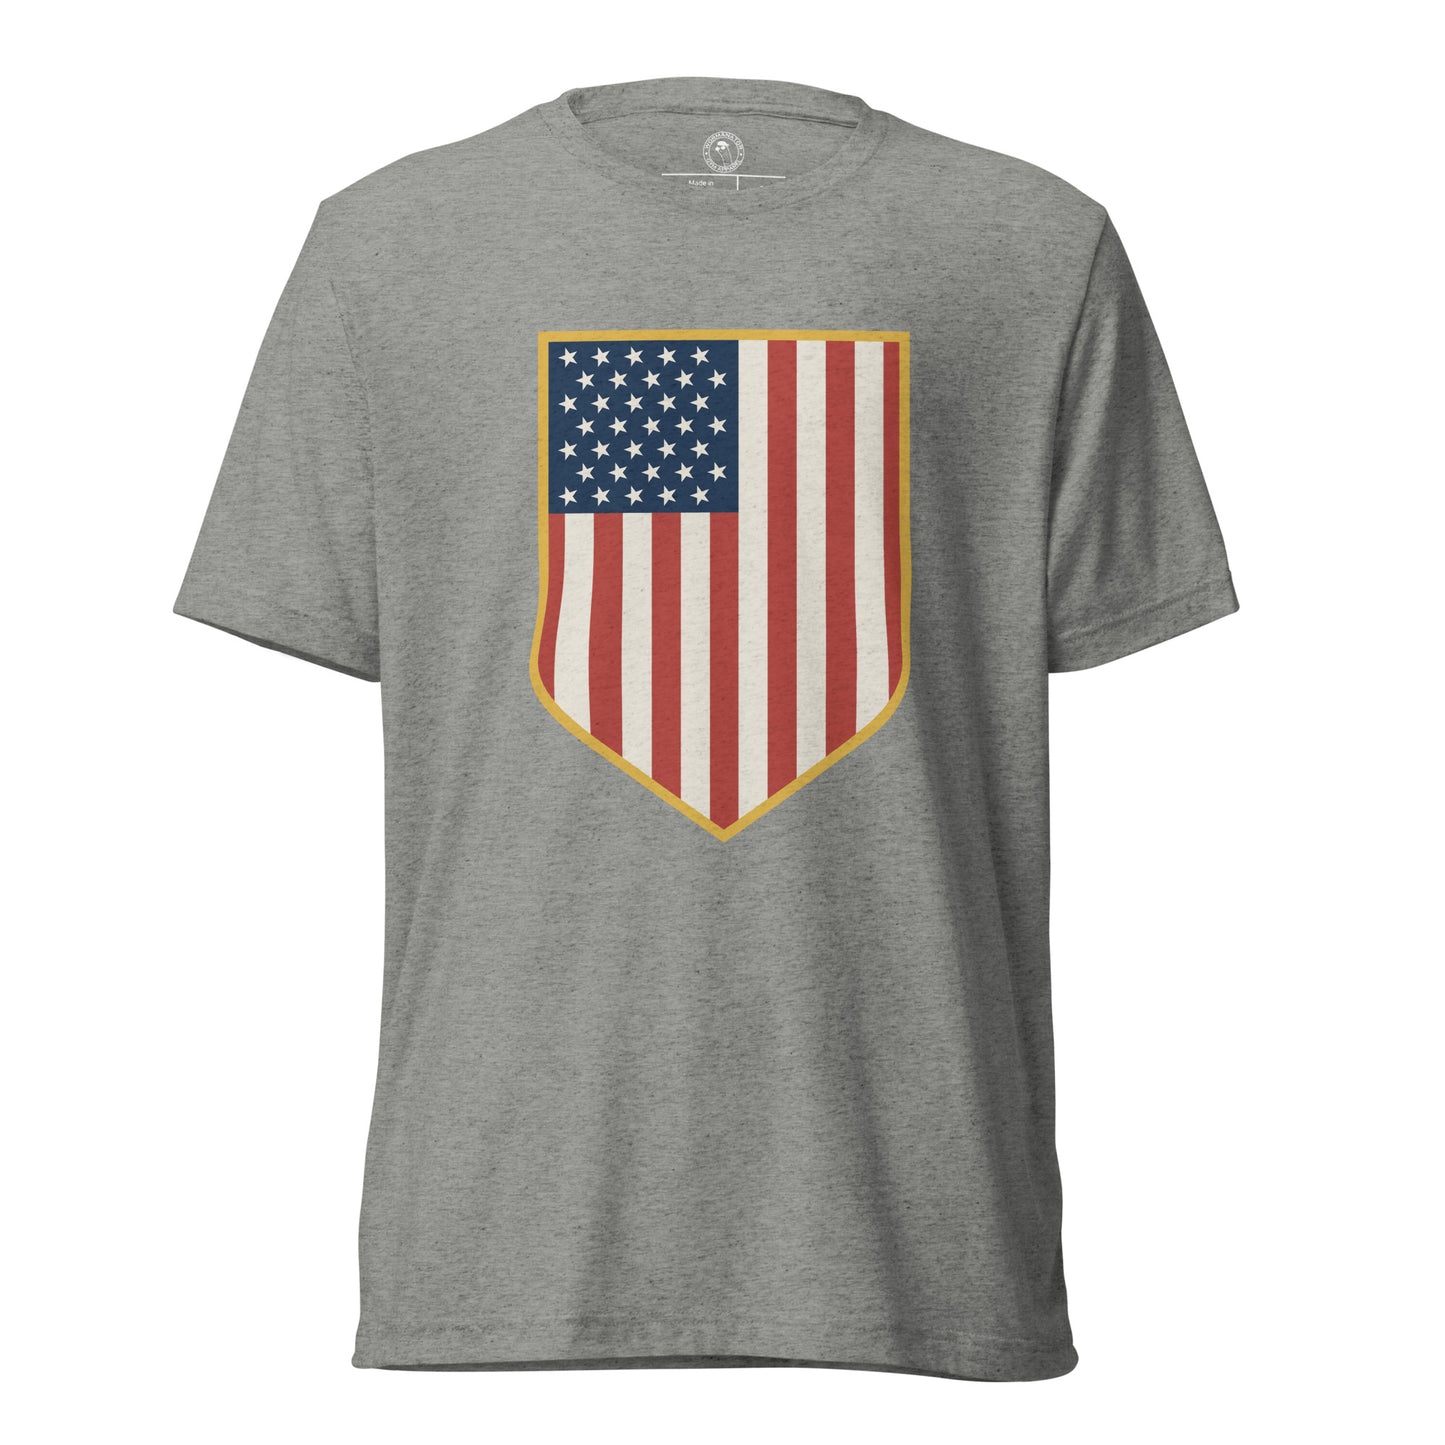 General Patton Shirt in Athletic Grey